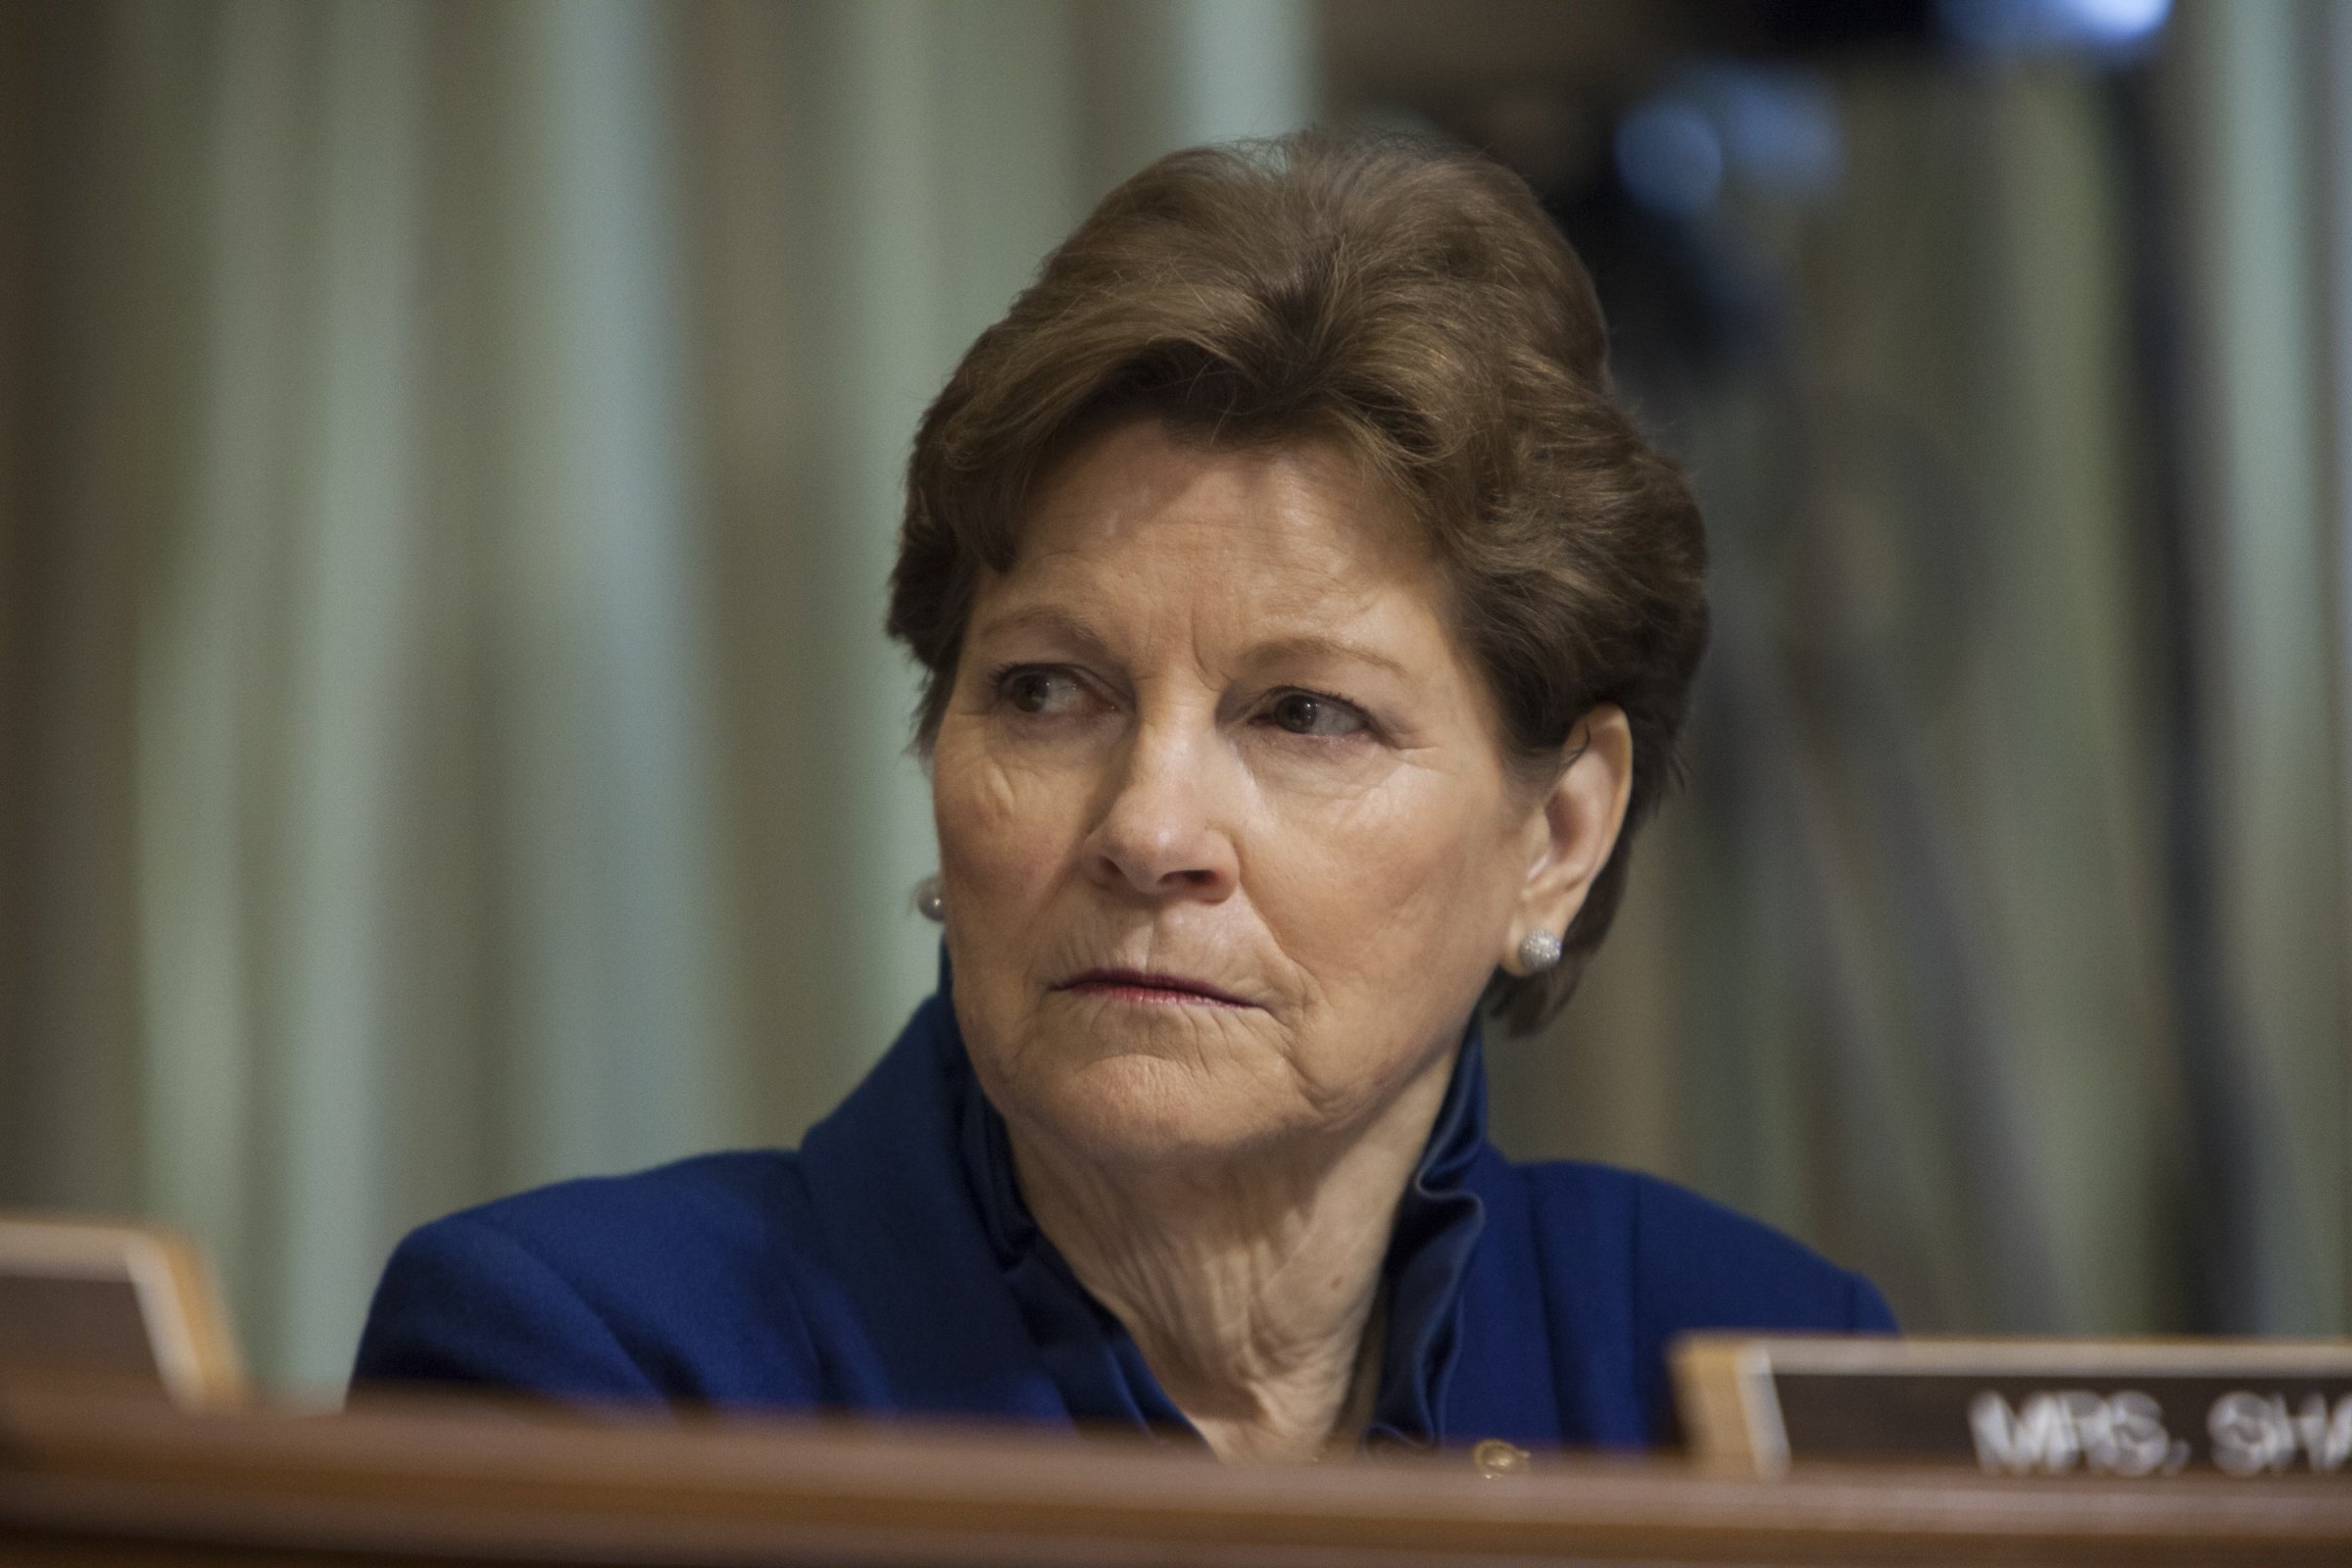 Senator Jeanne Shaheen listens to opening remarks during a Senate Foreign Relations Committee hearing on U.S. Policy In Ukraine in Washington, D.C., USA on March 10, 2015.